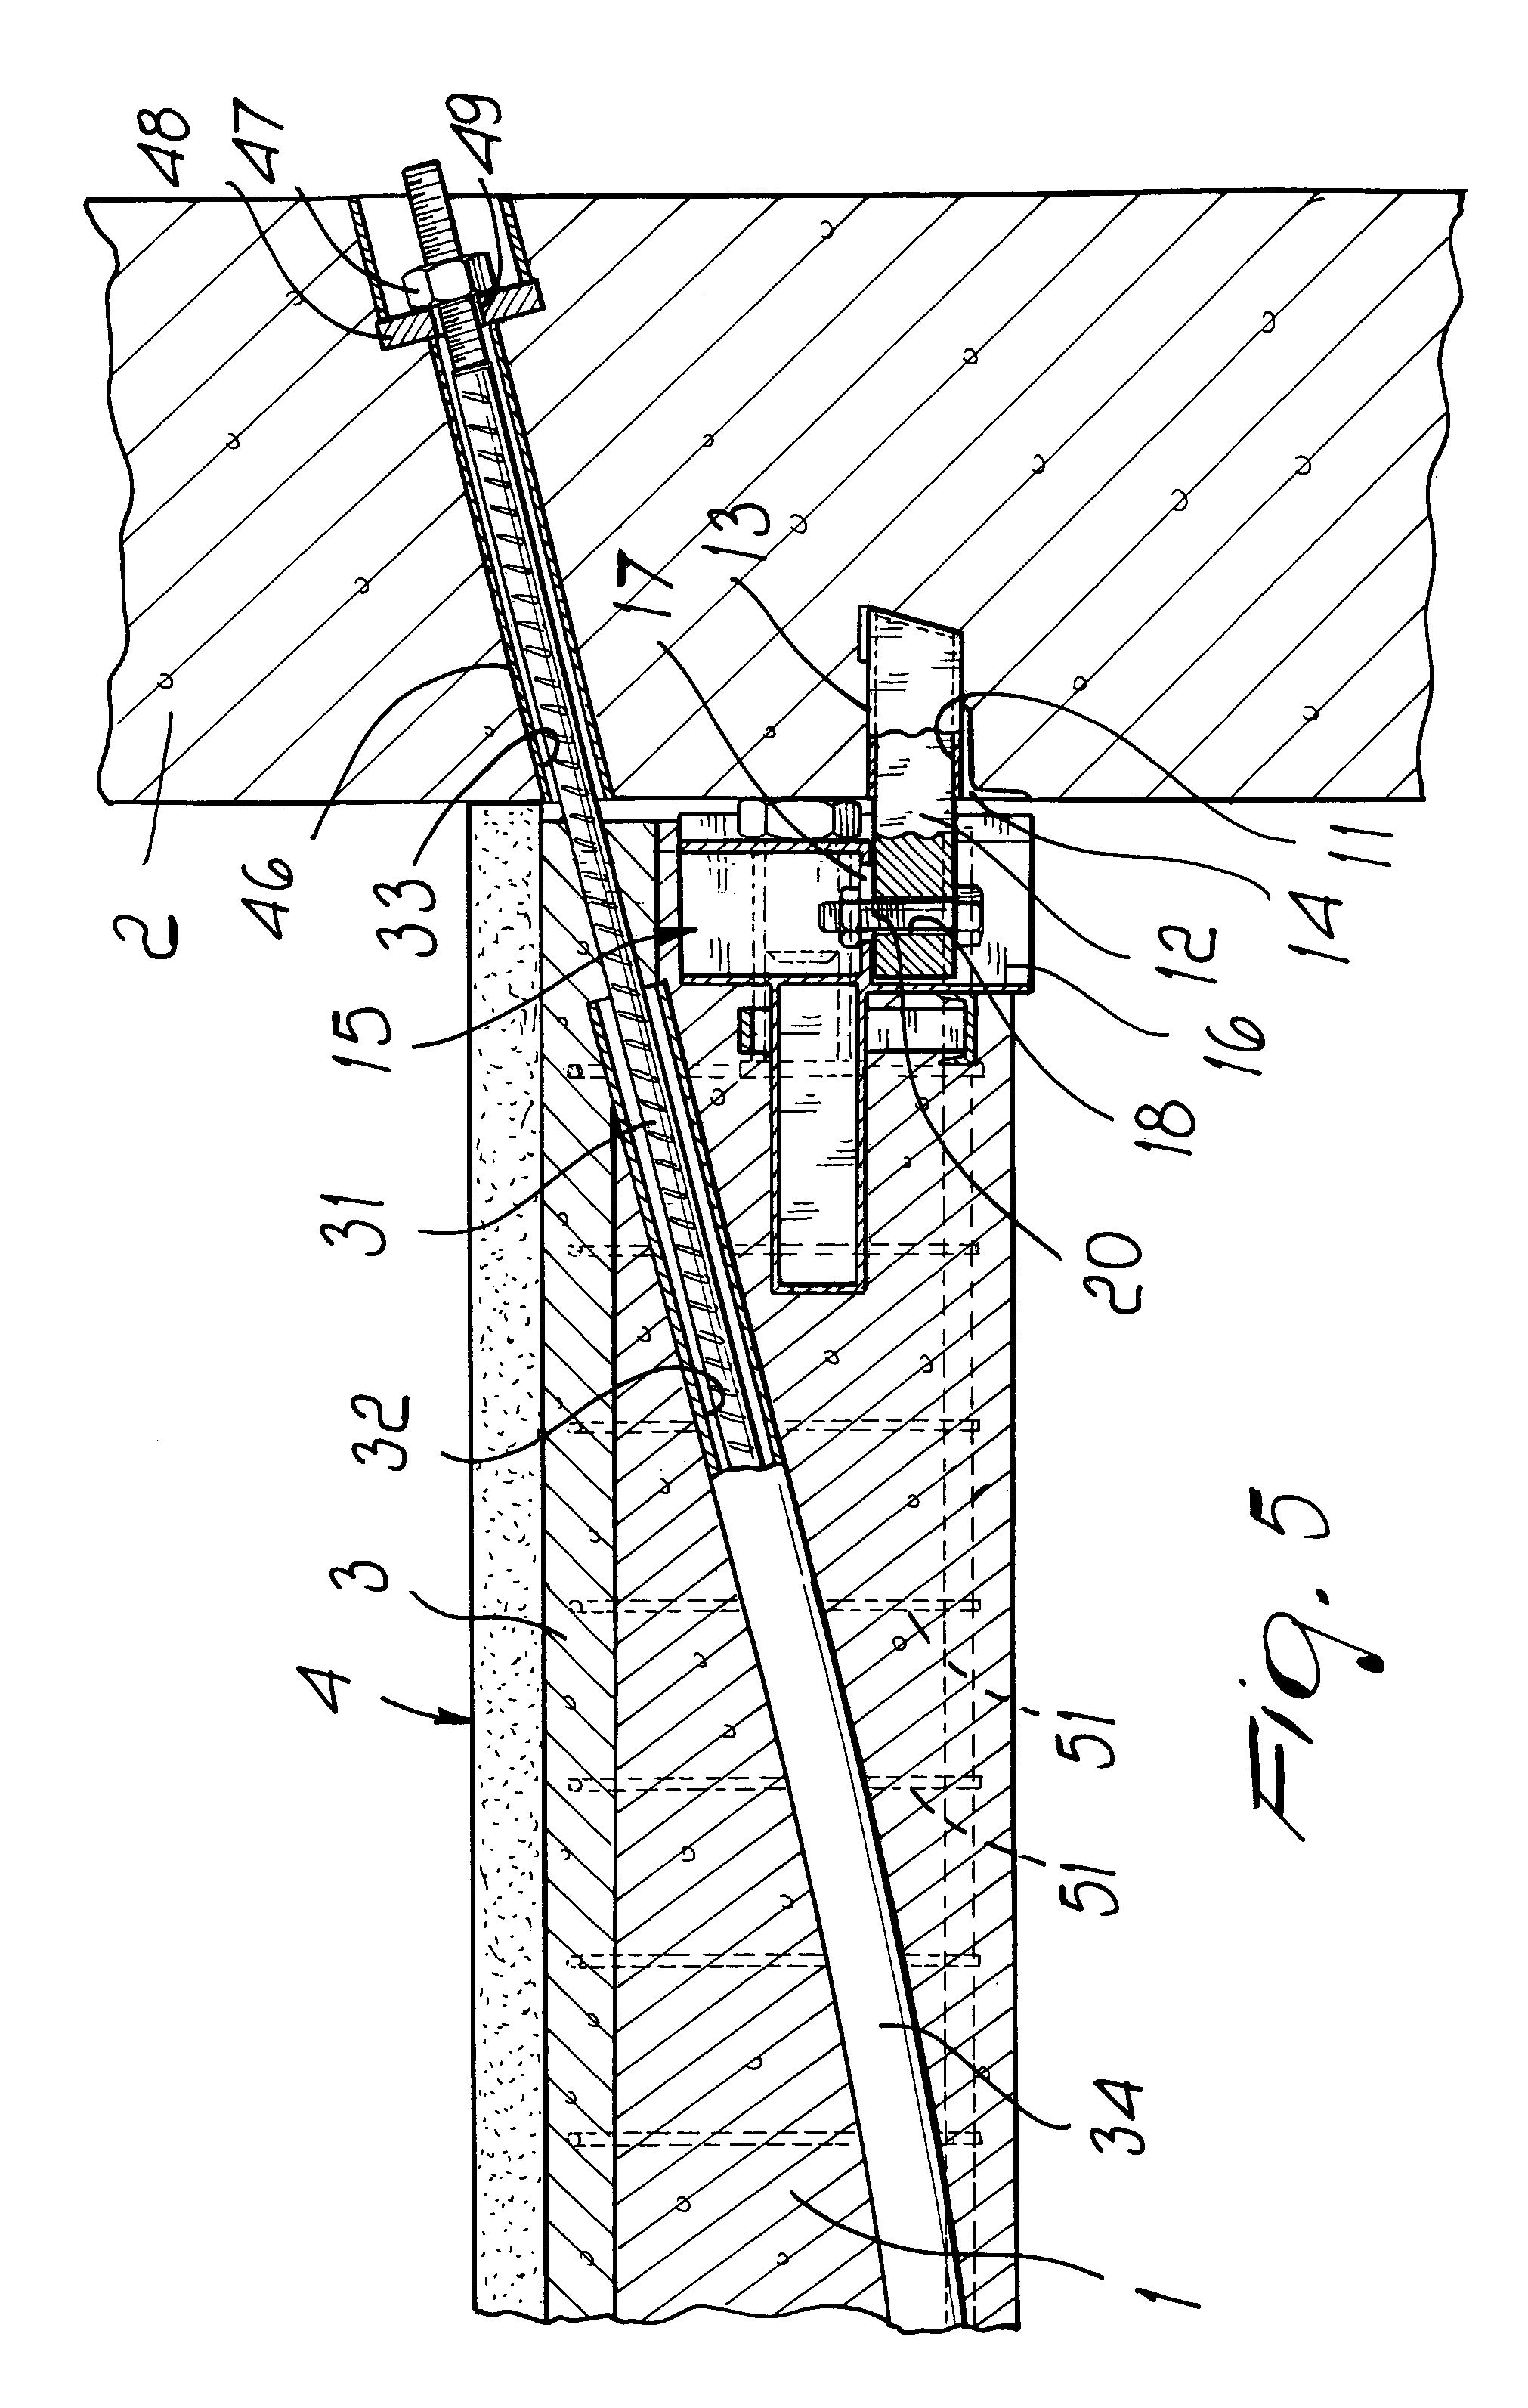 Device for connecting a beam to pillars or similar supporting structural elements for erecting buildings